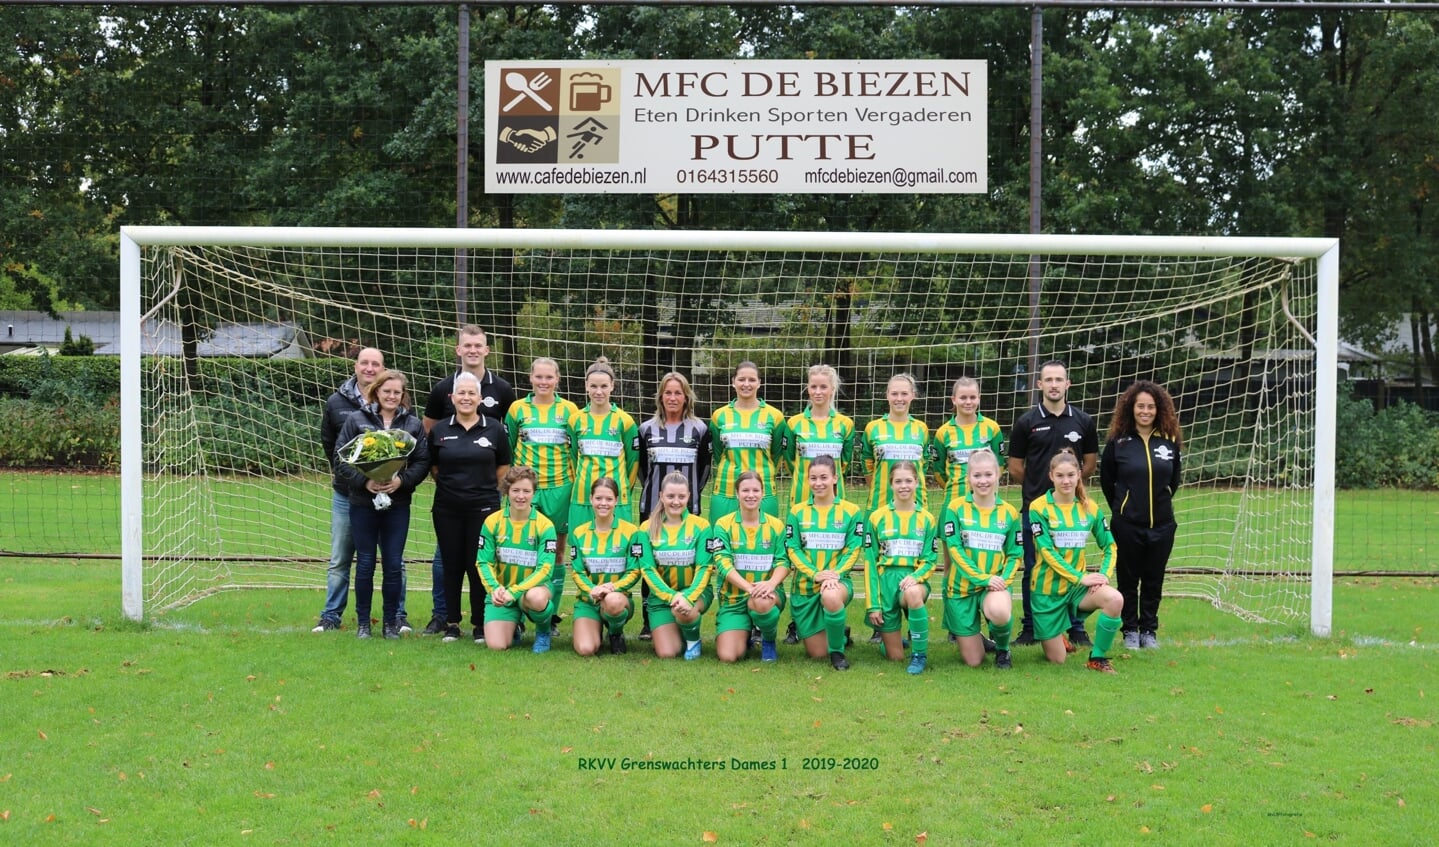 Grenswachters dames 1